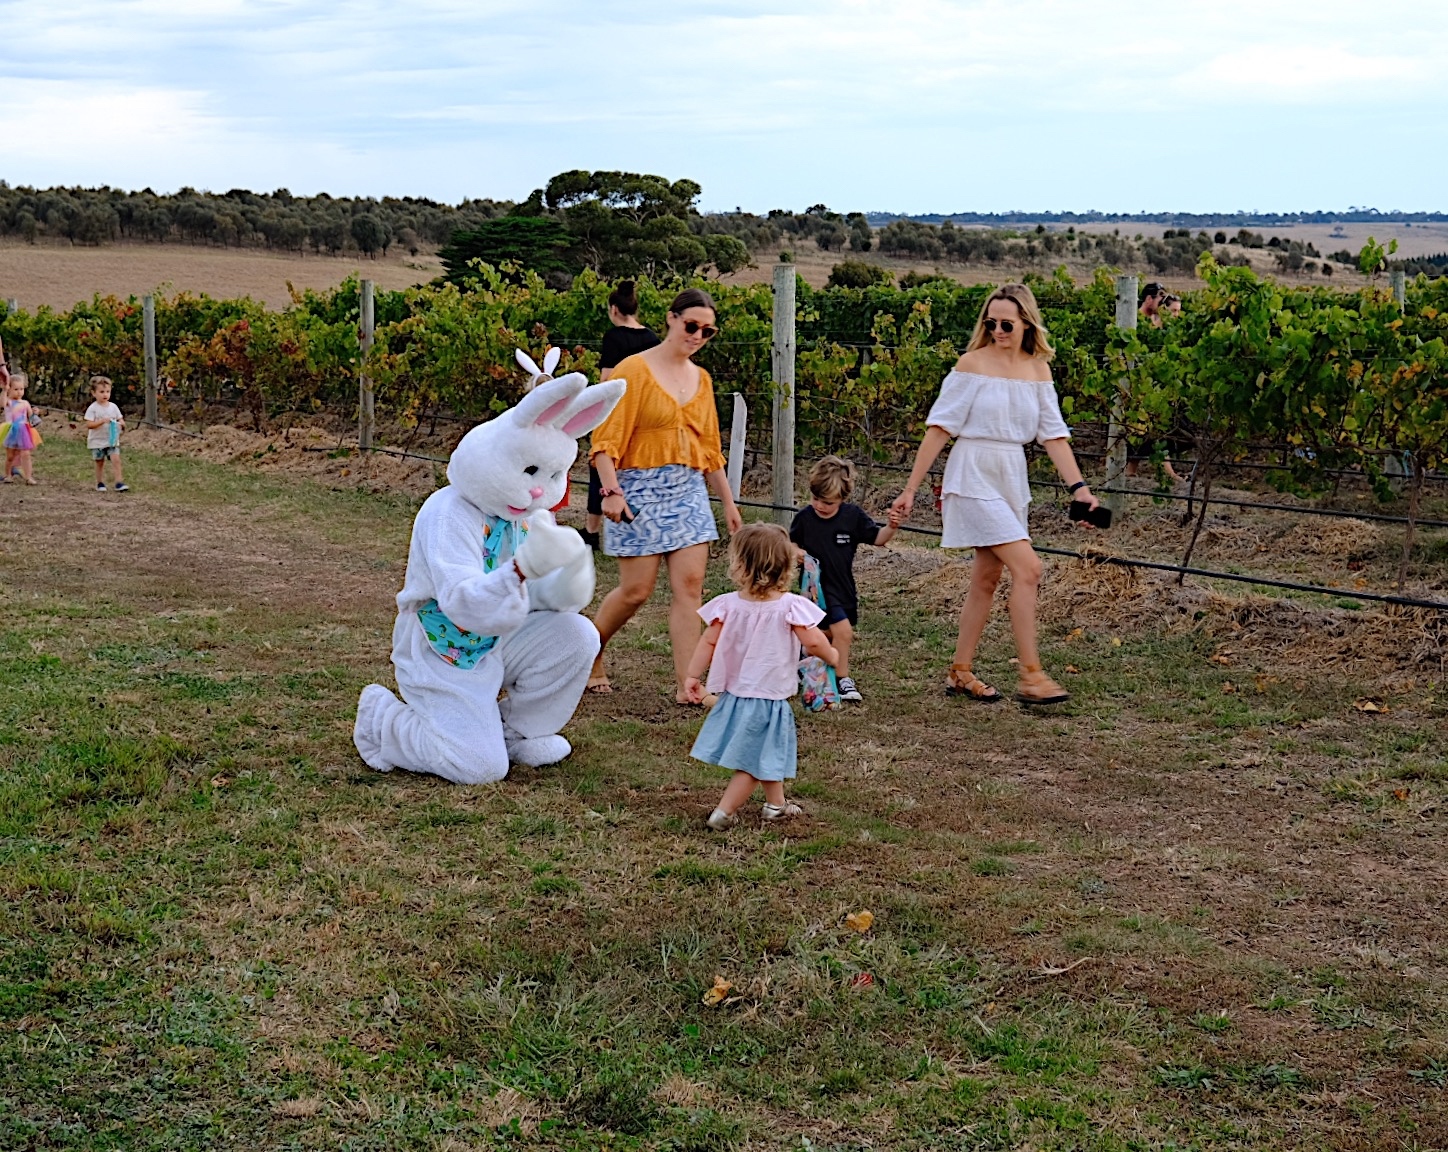 A family stand next to the vineyards and Easter Bunny at Austin's Wines